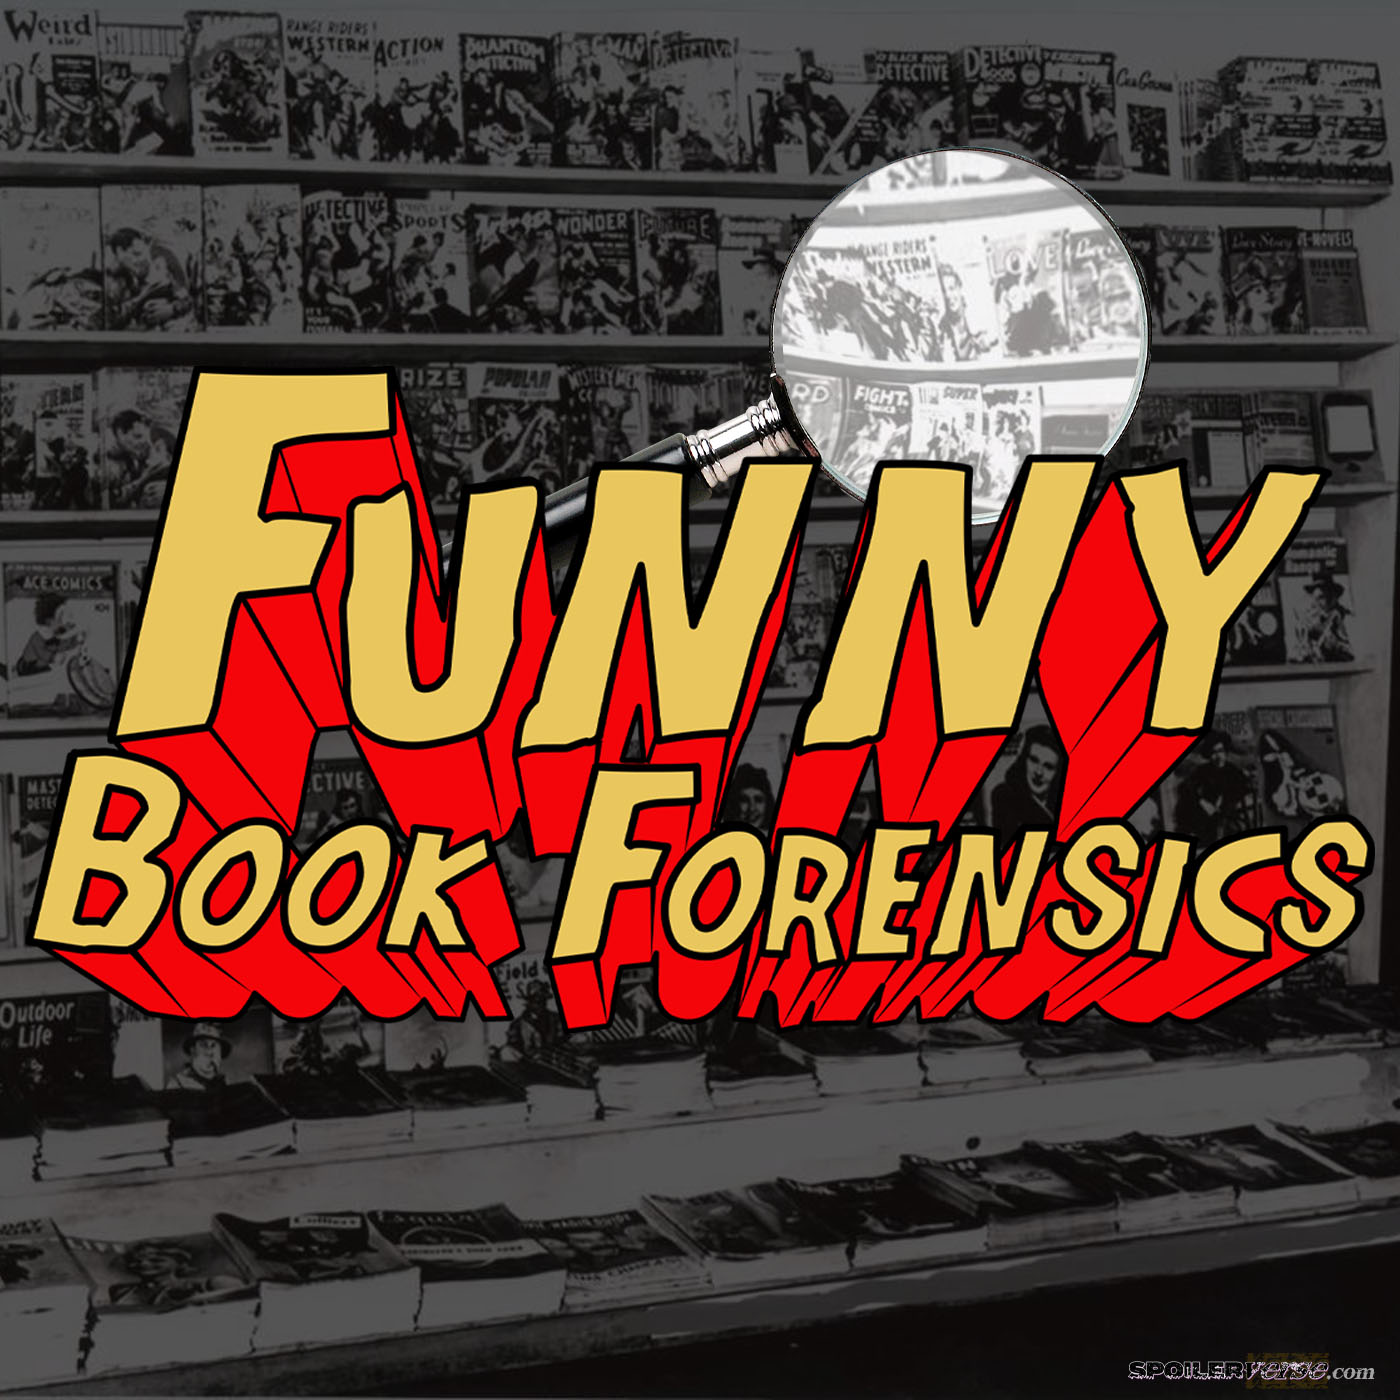 Funny Book Forensics 333 Ducking Corporations